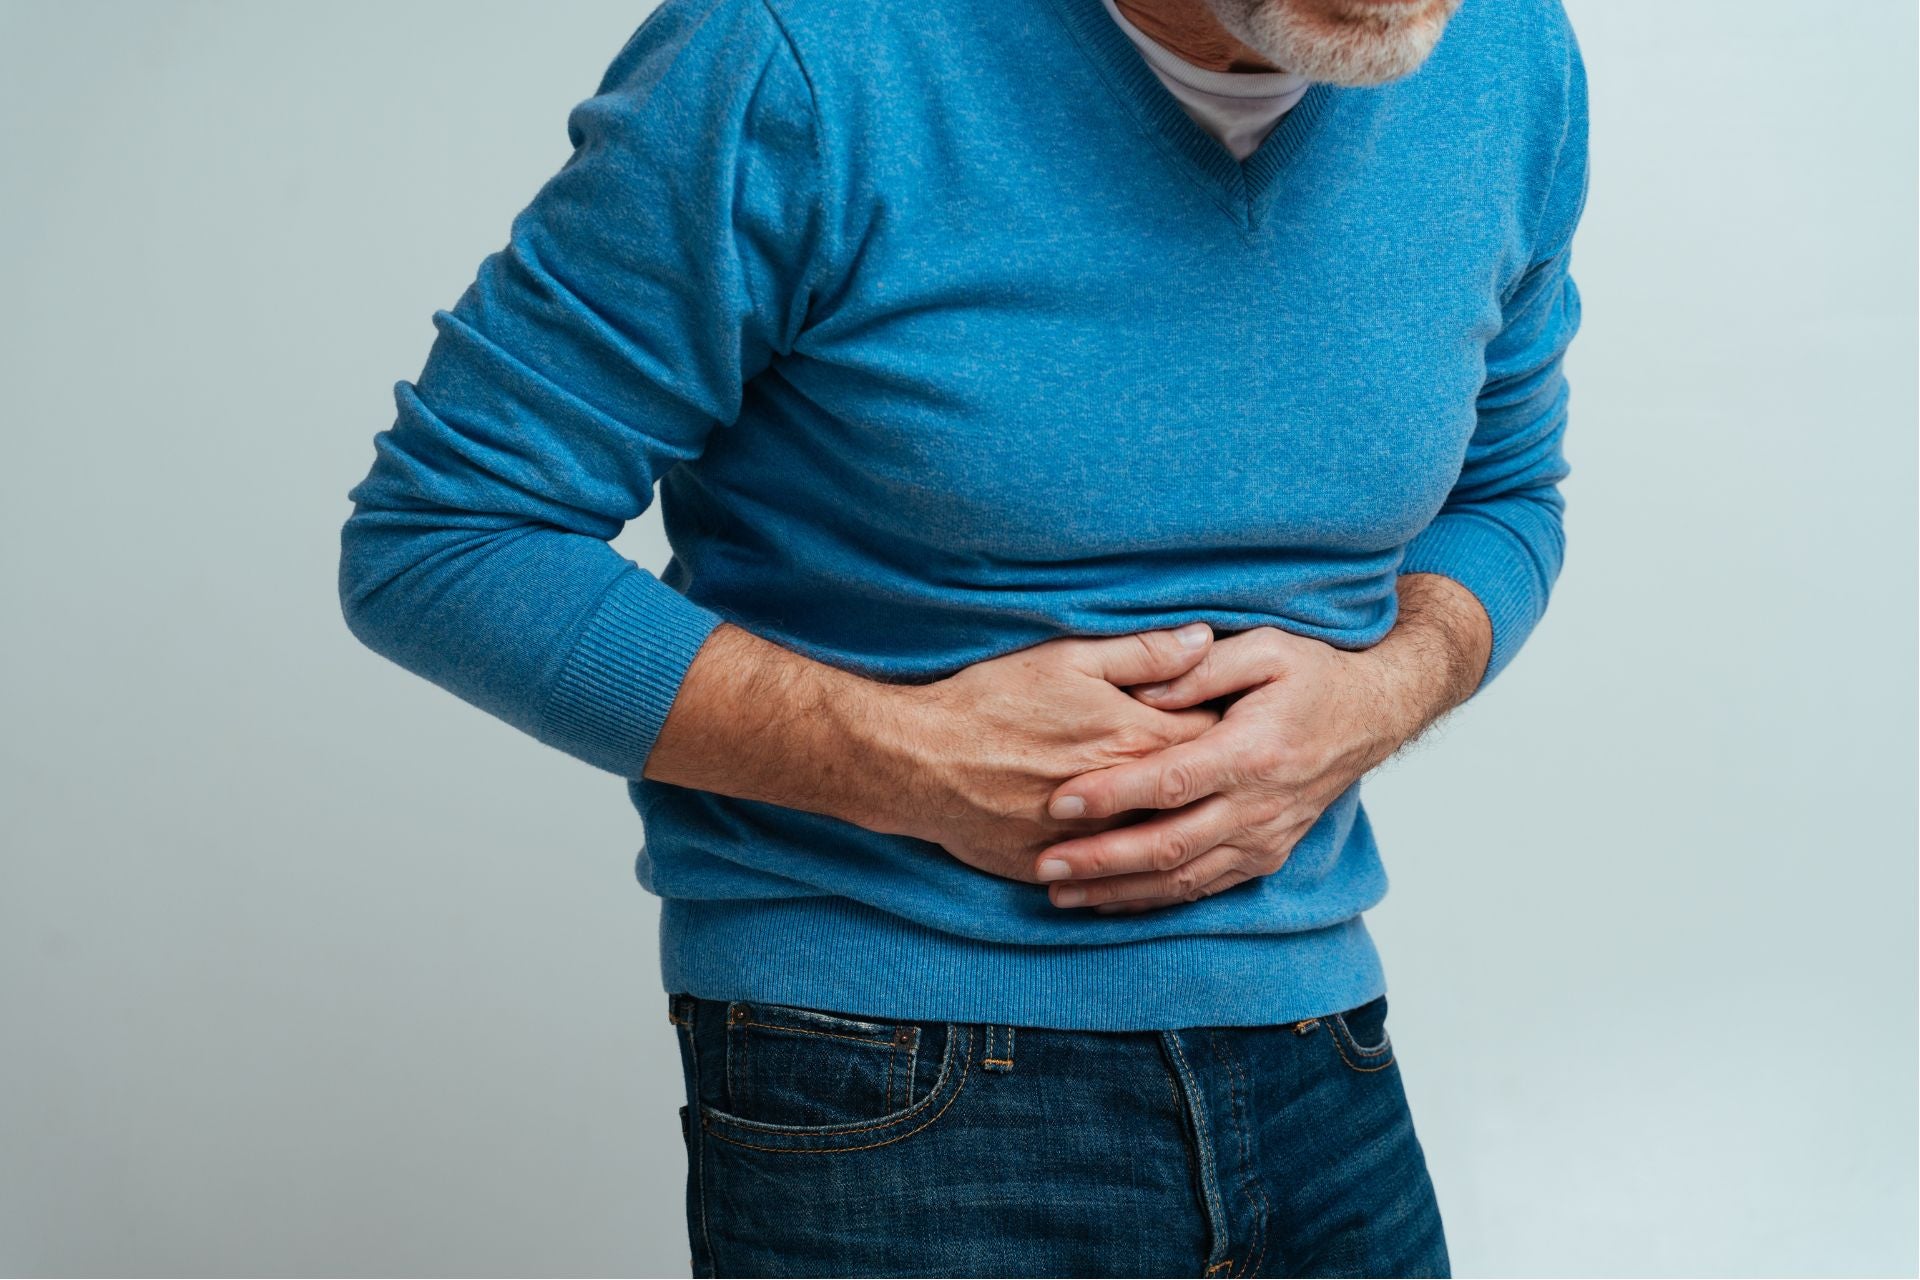 Elderly man suffering from IBD disease. He is holding his stomach with both hands.